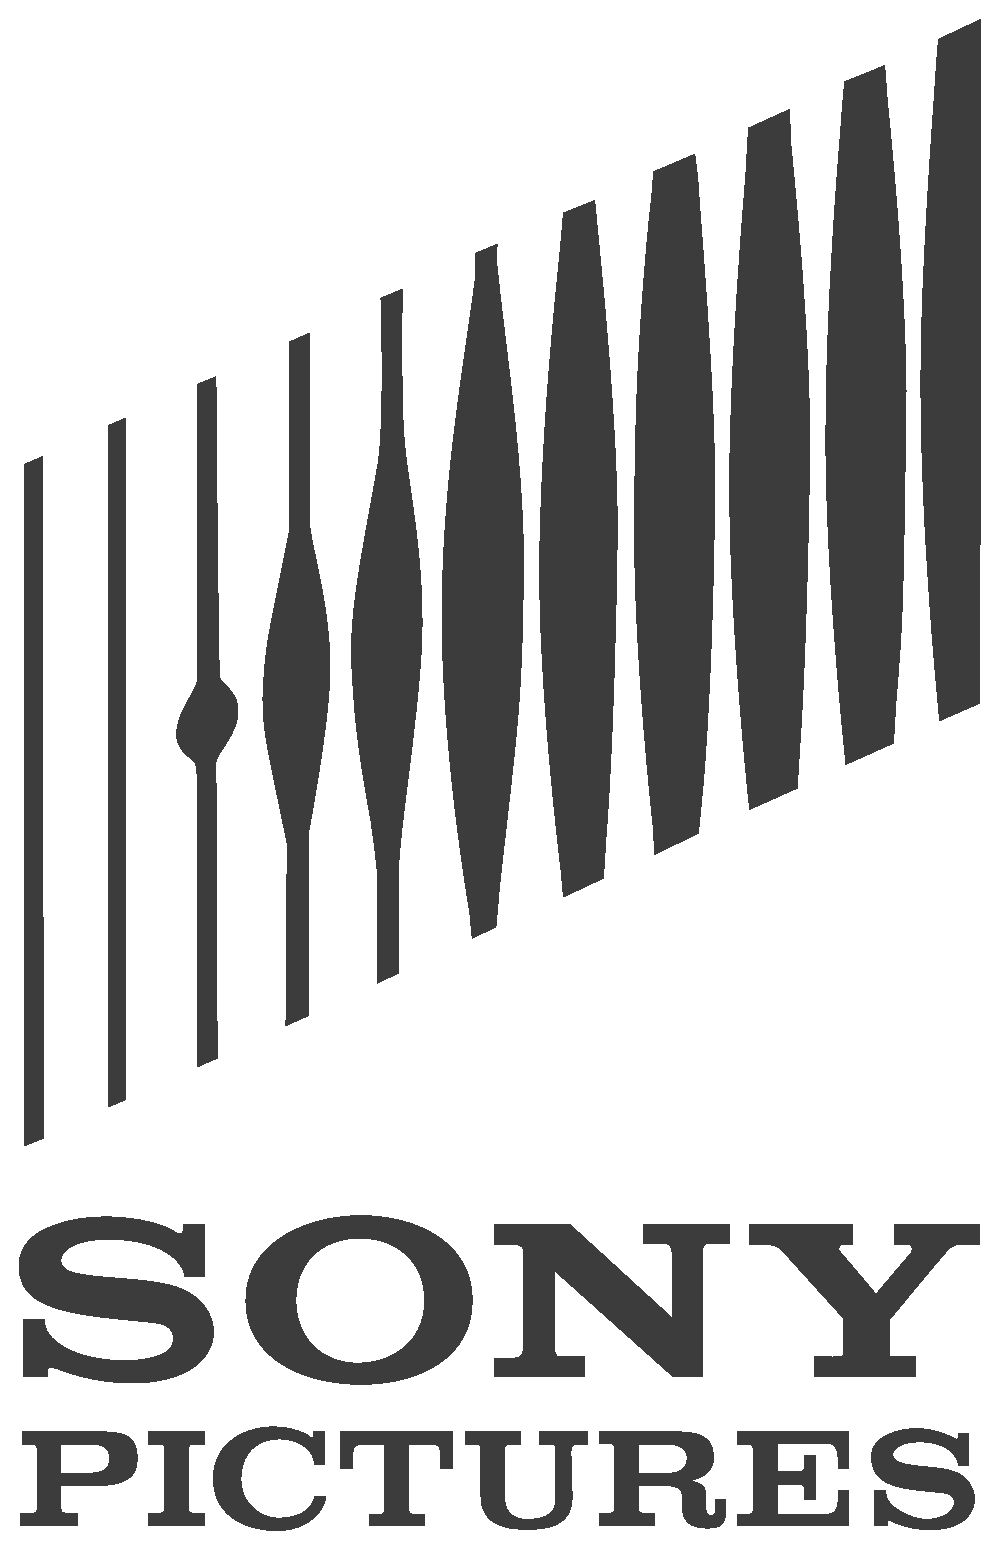 Sony_pictures_logo copy.png